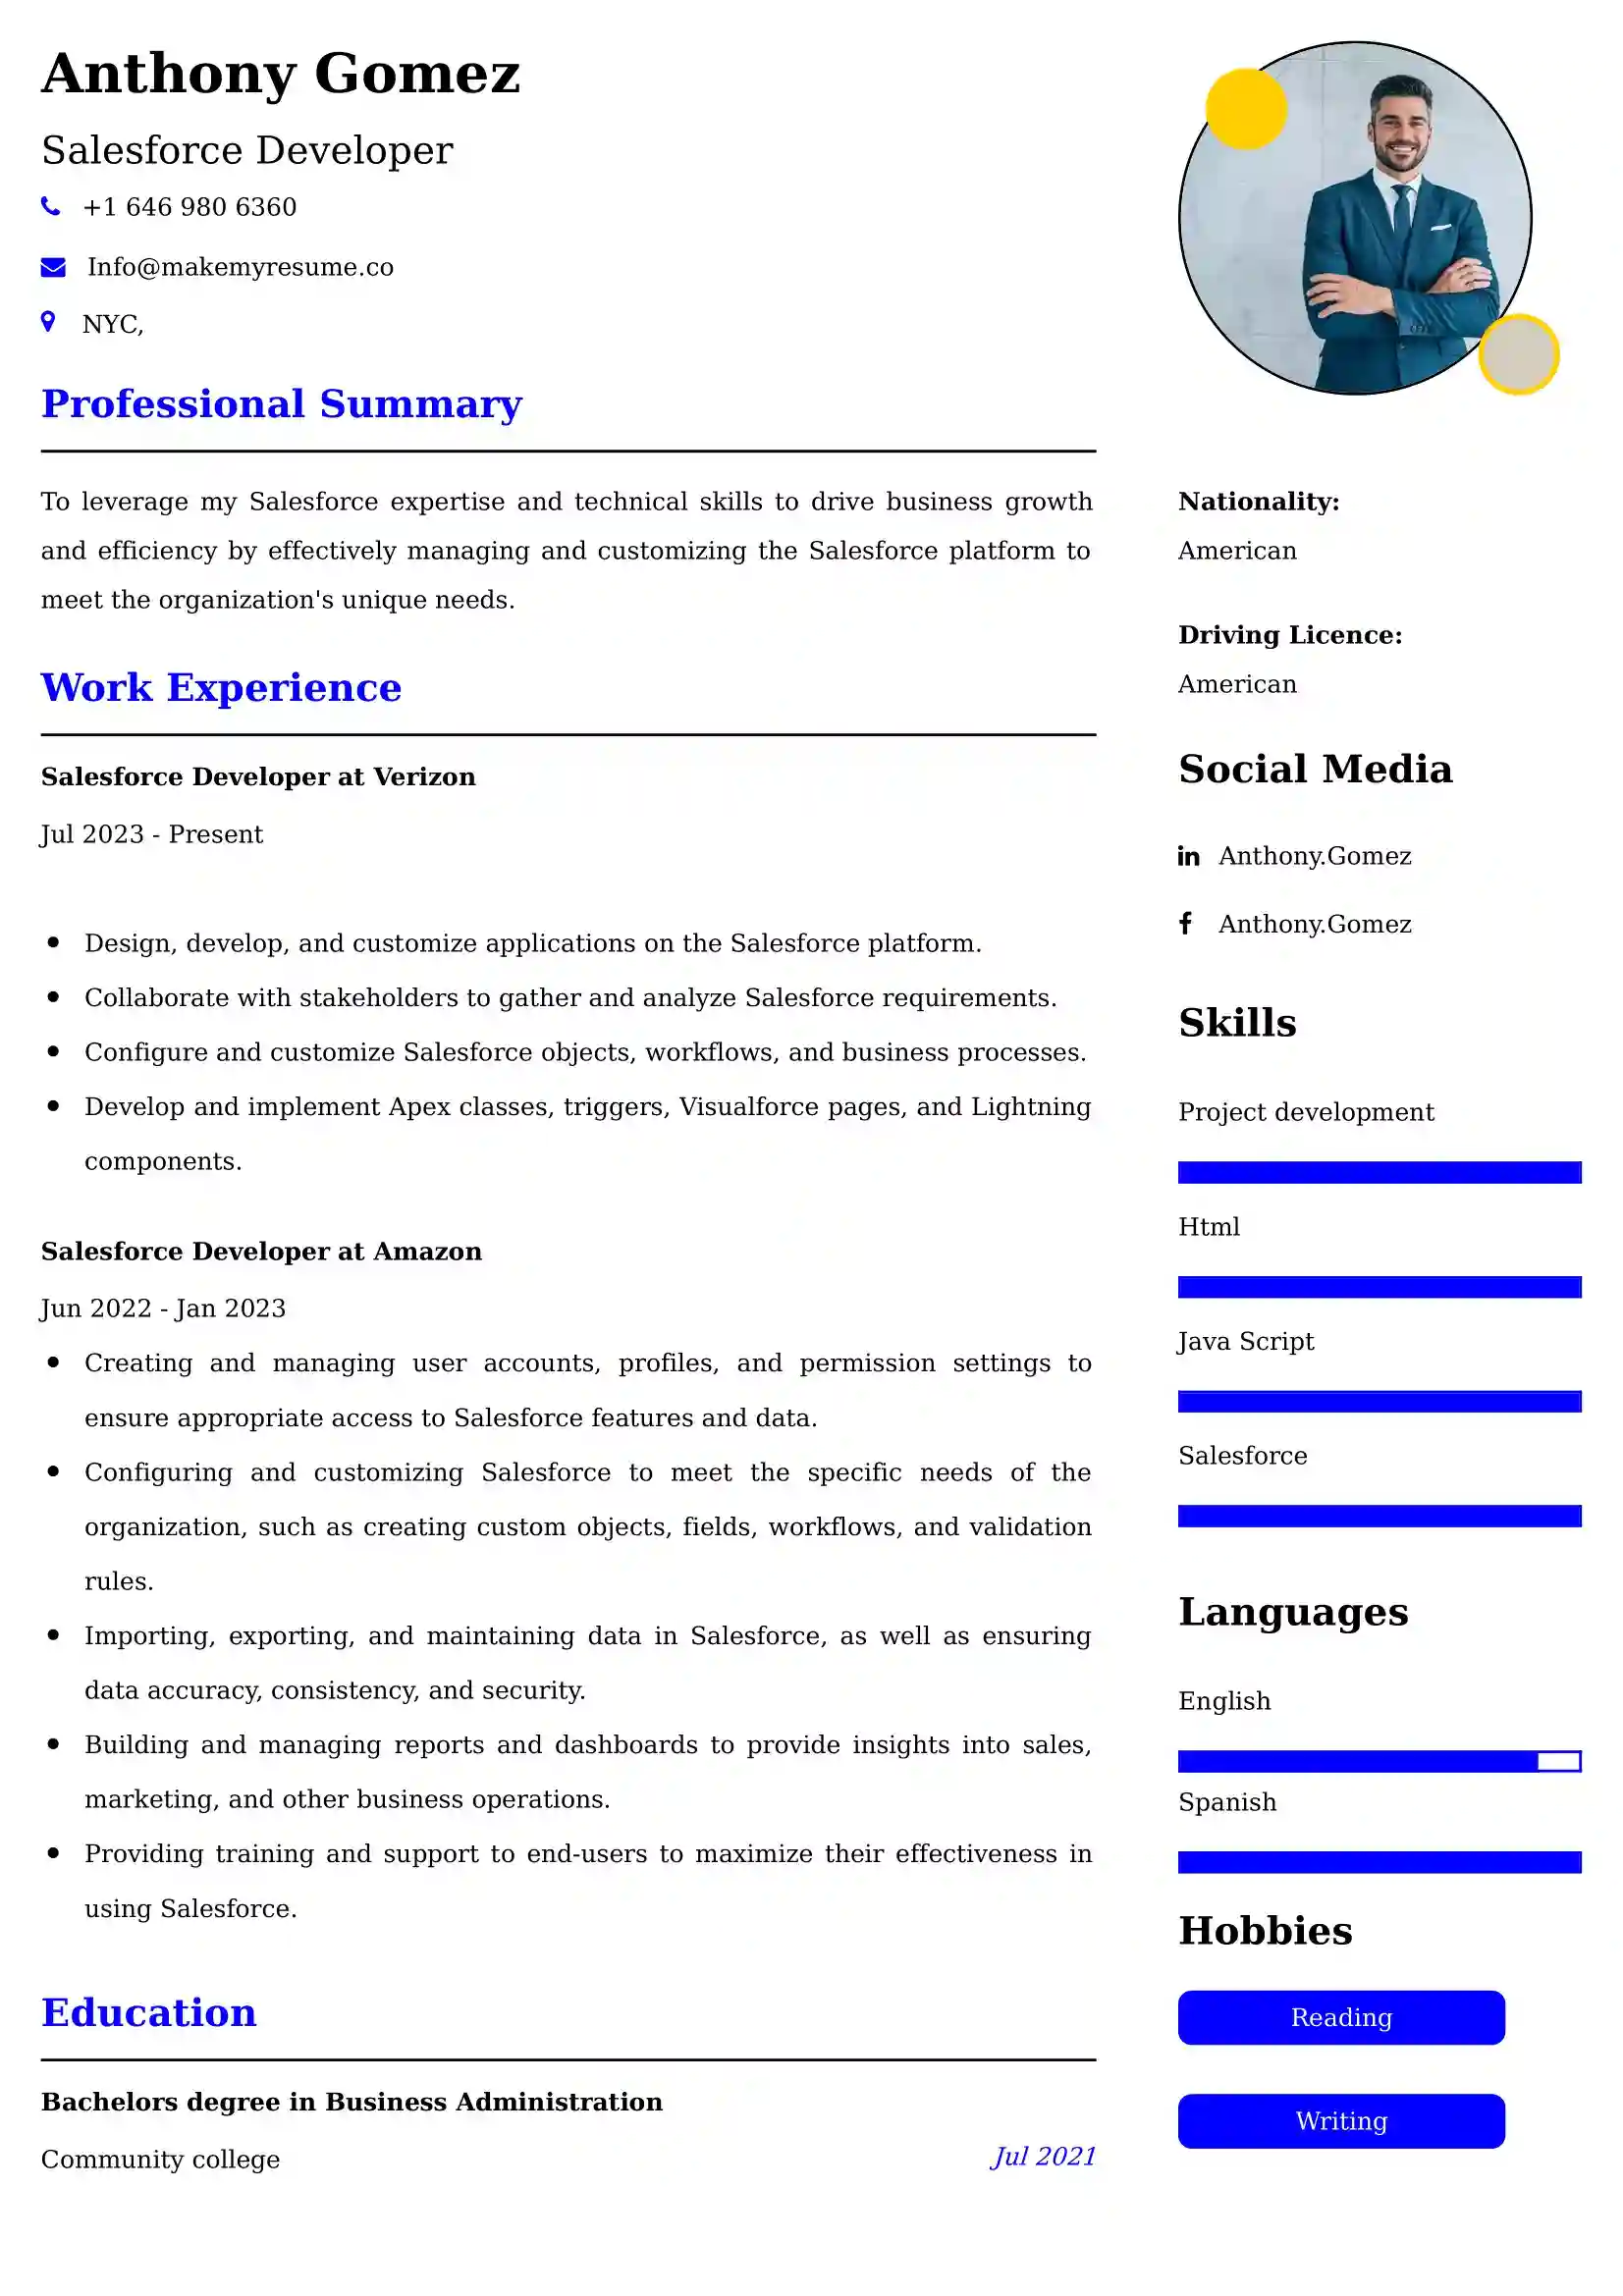 Salesforce Developer Resume Examples - UAE Format and Tips.